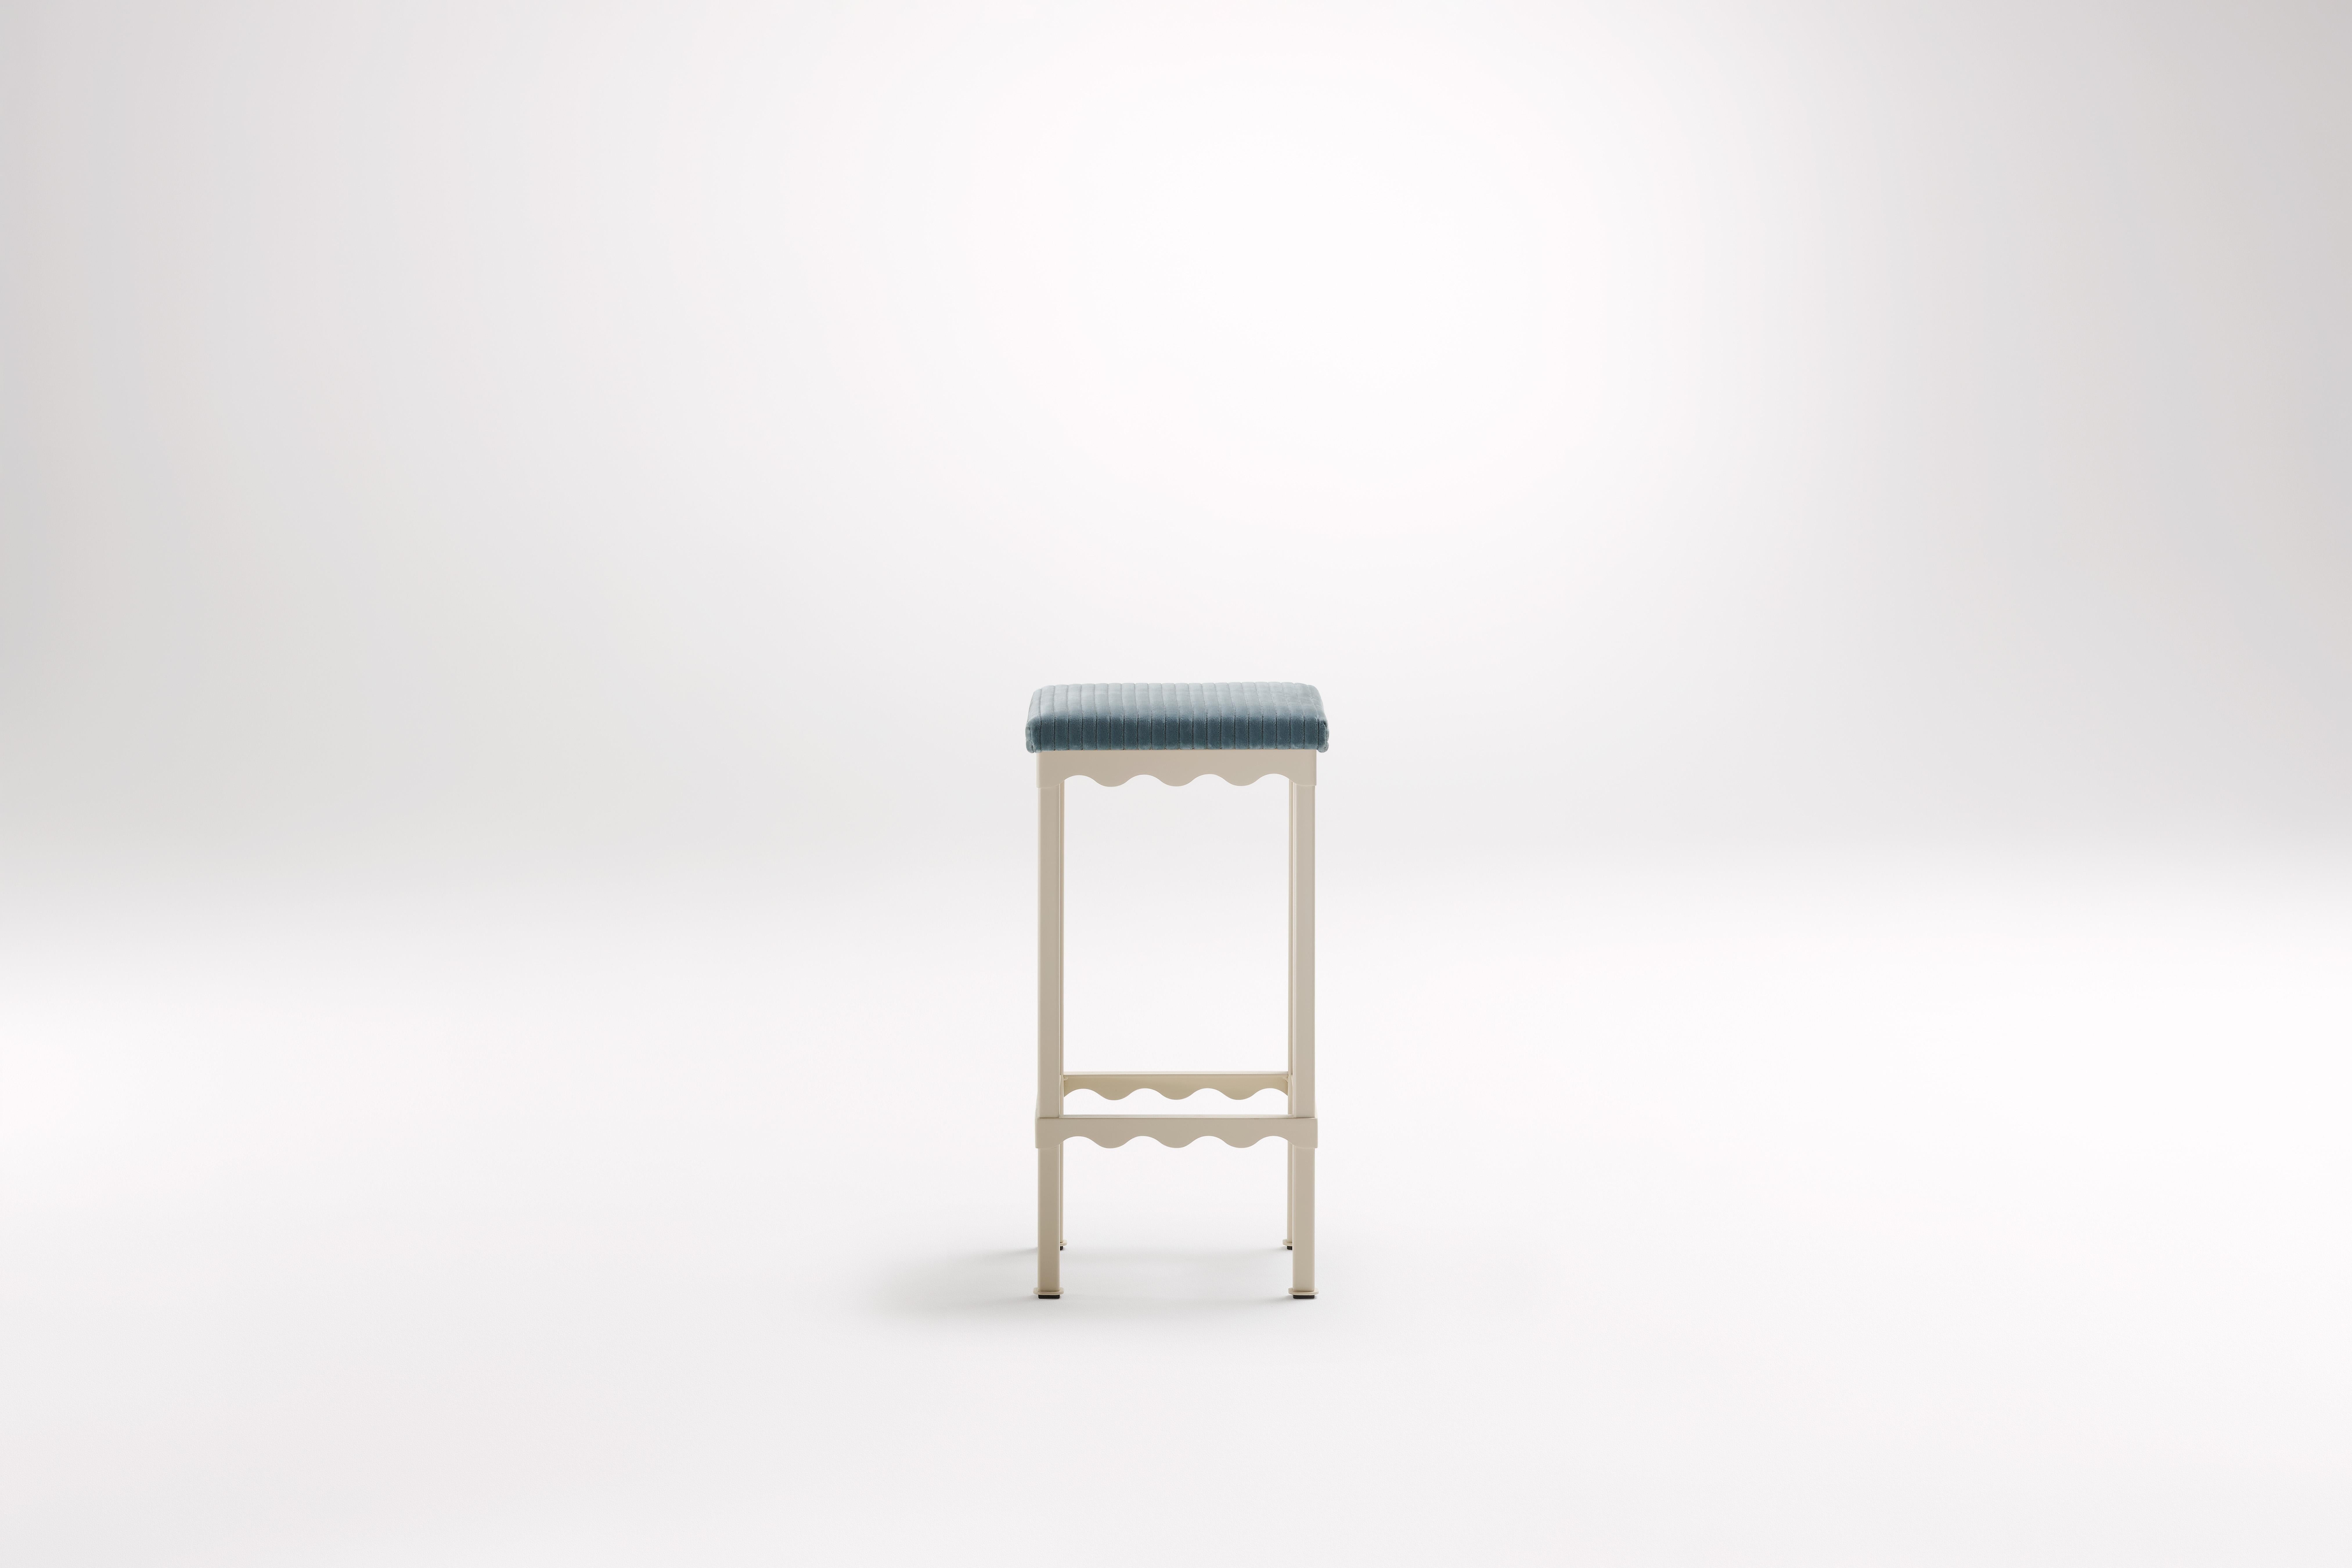 Oracle Bellini High Stool by Coco Flip
Dimensions: D 34 x W 34 x H 65/75 cm
Materials: Timber / Stone tops, Powder-coated steel frame. 
Weight: 8kg
Frame Finishes: Textura Paperbark.

Coco Flip is a Melbourne based furniture and lighting design